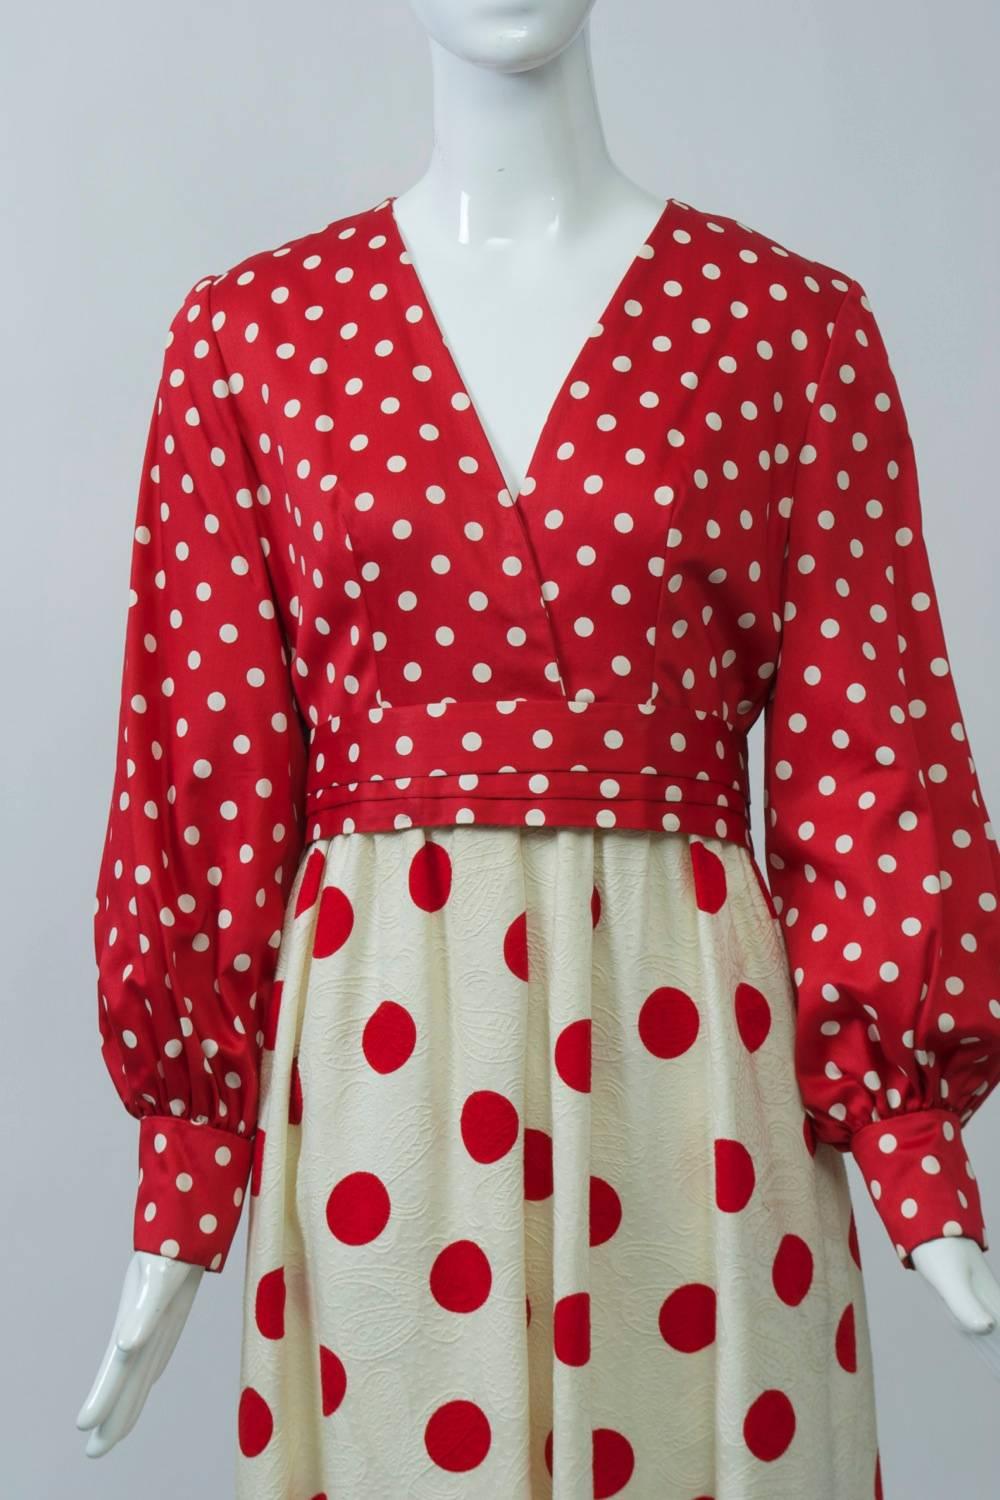 Red and white reverse polka dot maxi dress in polished cotton features a v neck, balloon sleeves and a long skirt. The high-waisted bodice has a red ground with small white polka dots and offers a striking contrast to the skirt, which has an